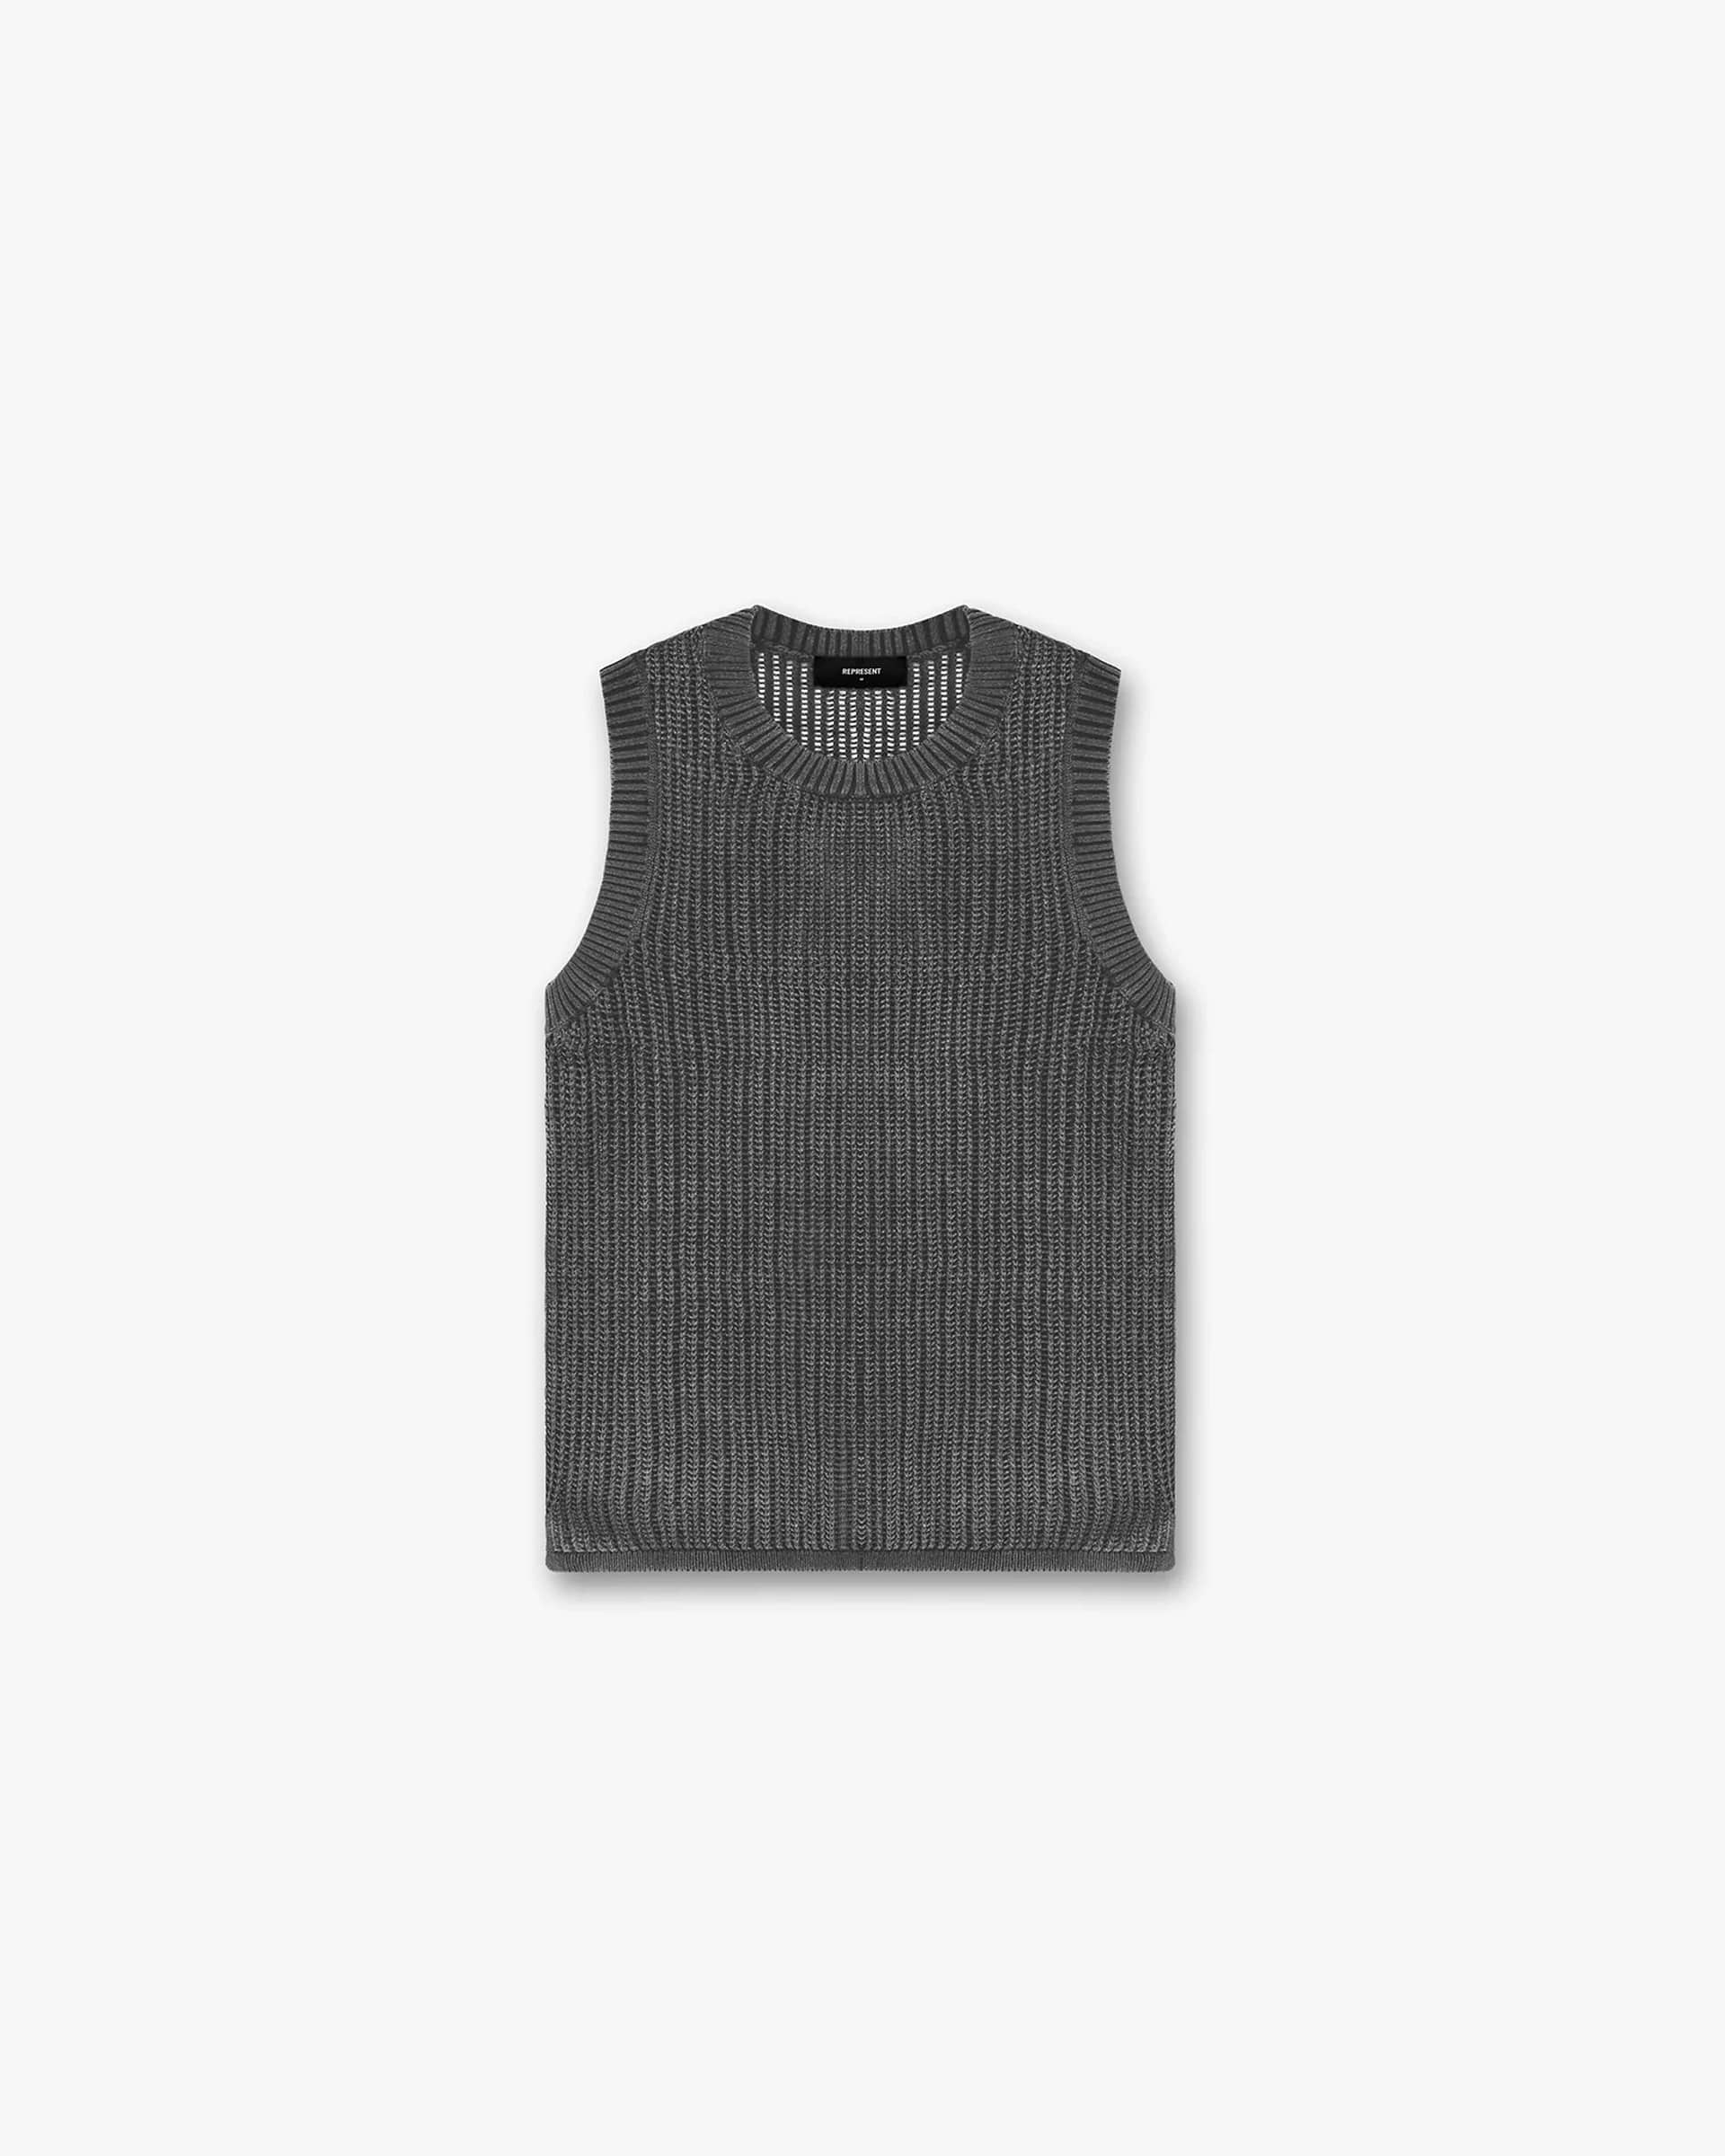 Knitted Tank | Black Knitwear SC23 | Represent Clo